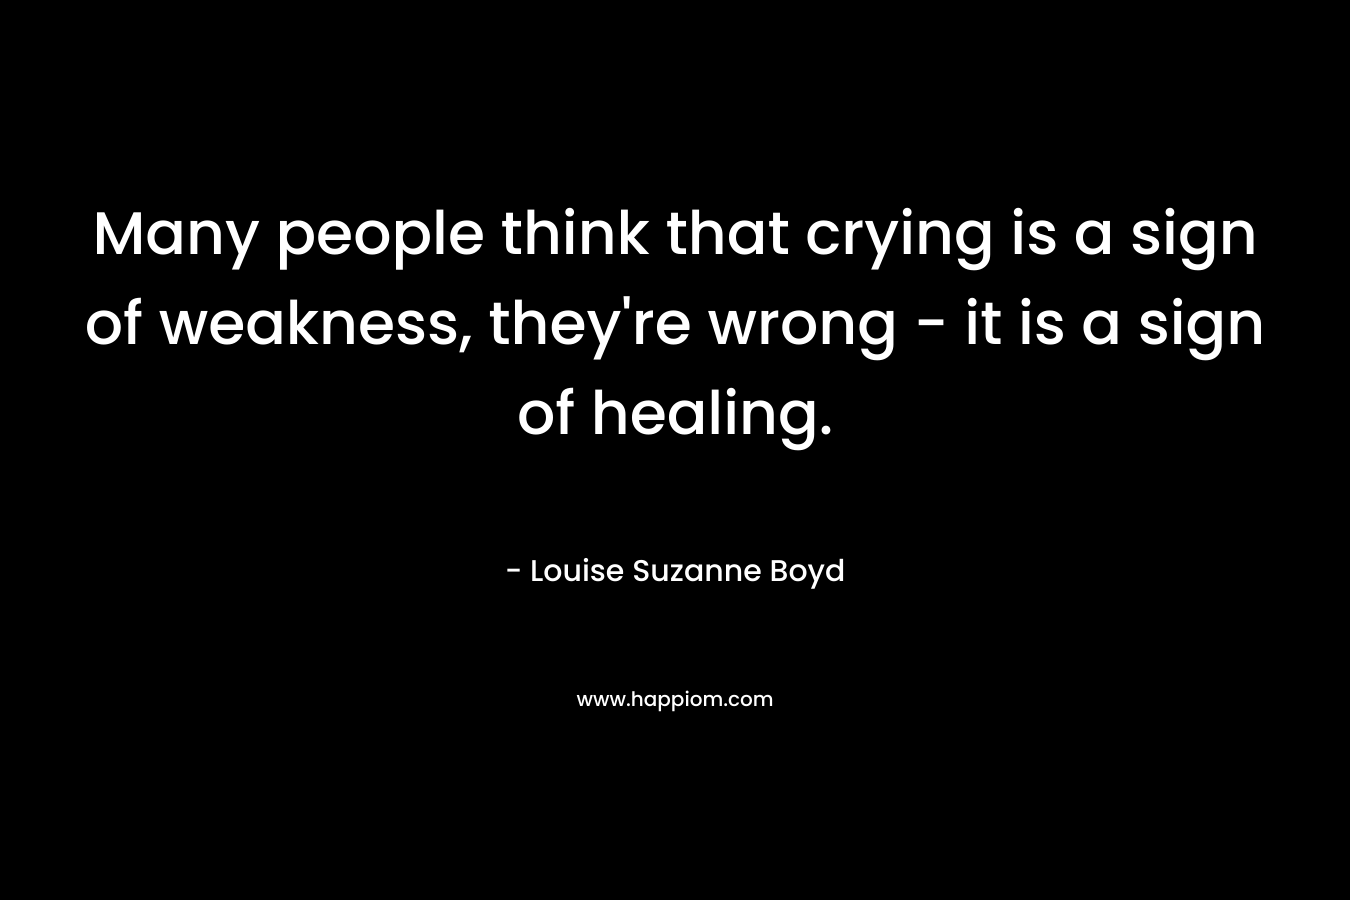 Many people think that crying is a sign of weakness, they're wrong - it is a sign of healing.